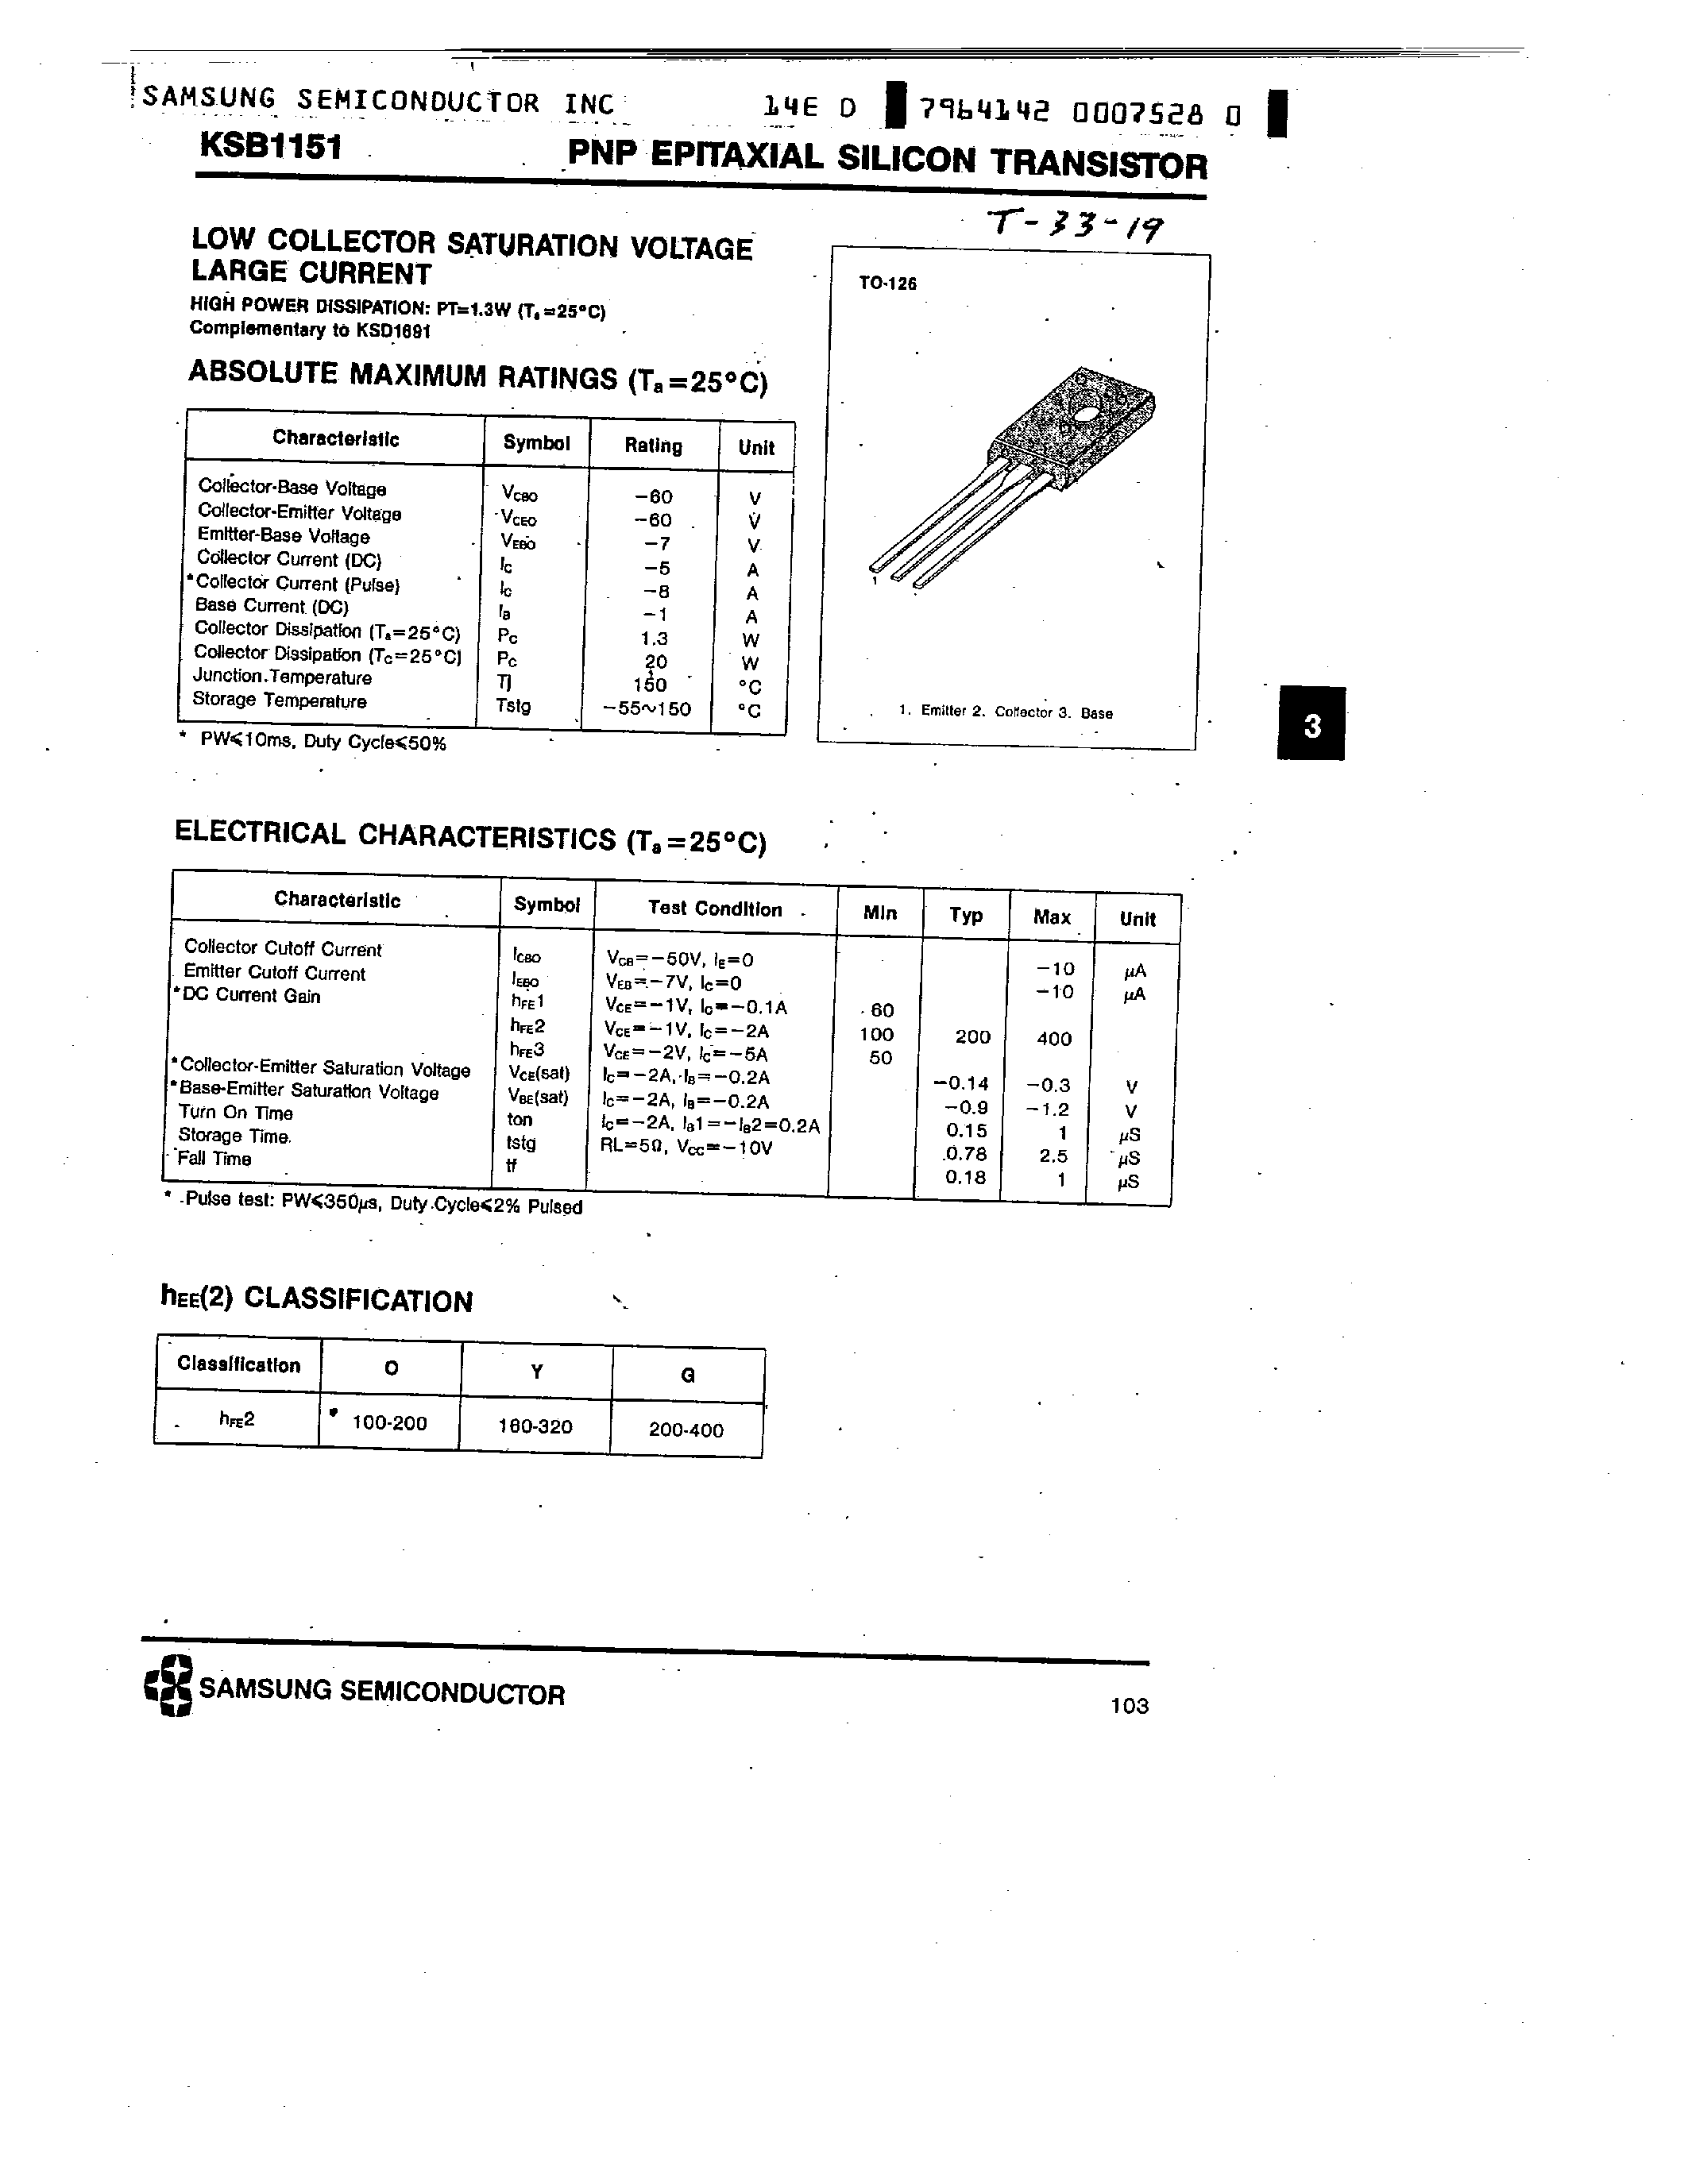 Datasheet KSB1151 - PNP (LOW COLLECTOR SATURATION VOLTAGE LARGE CURRENT) page 1